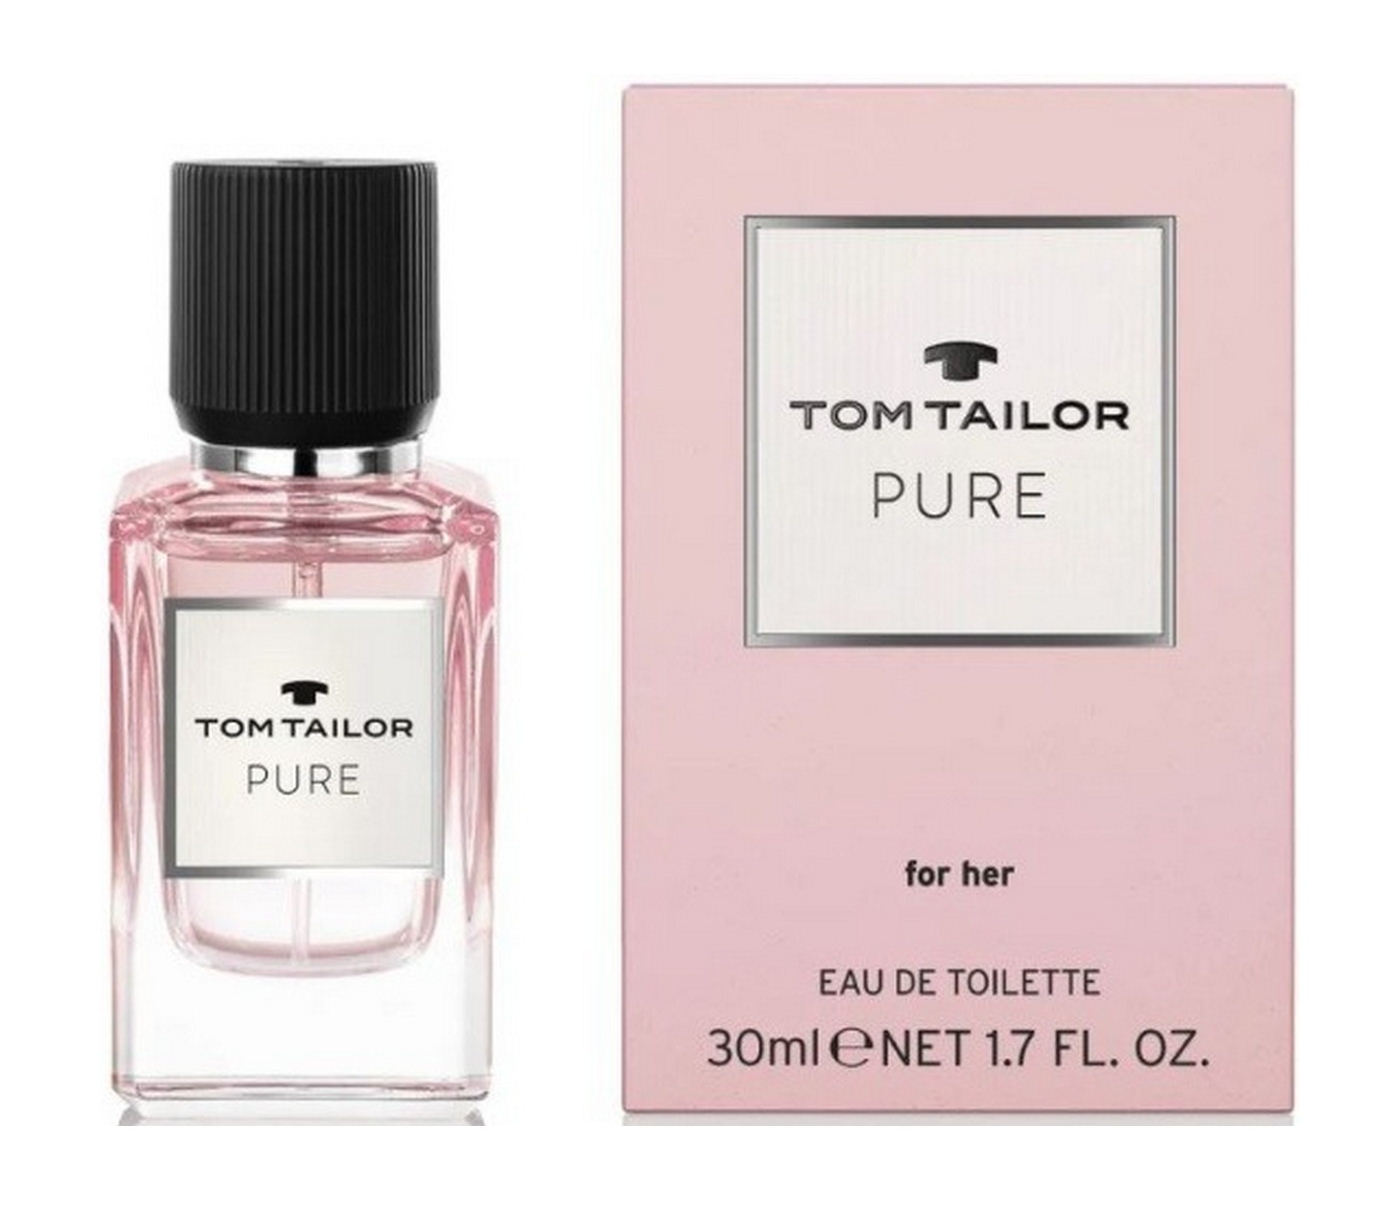 Tom Tailor - Pure for her